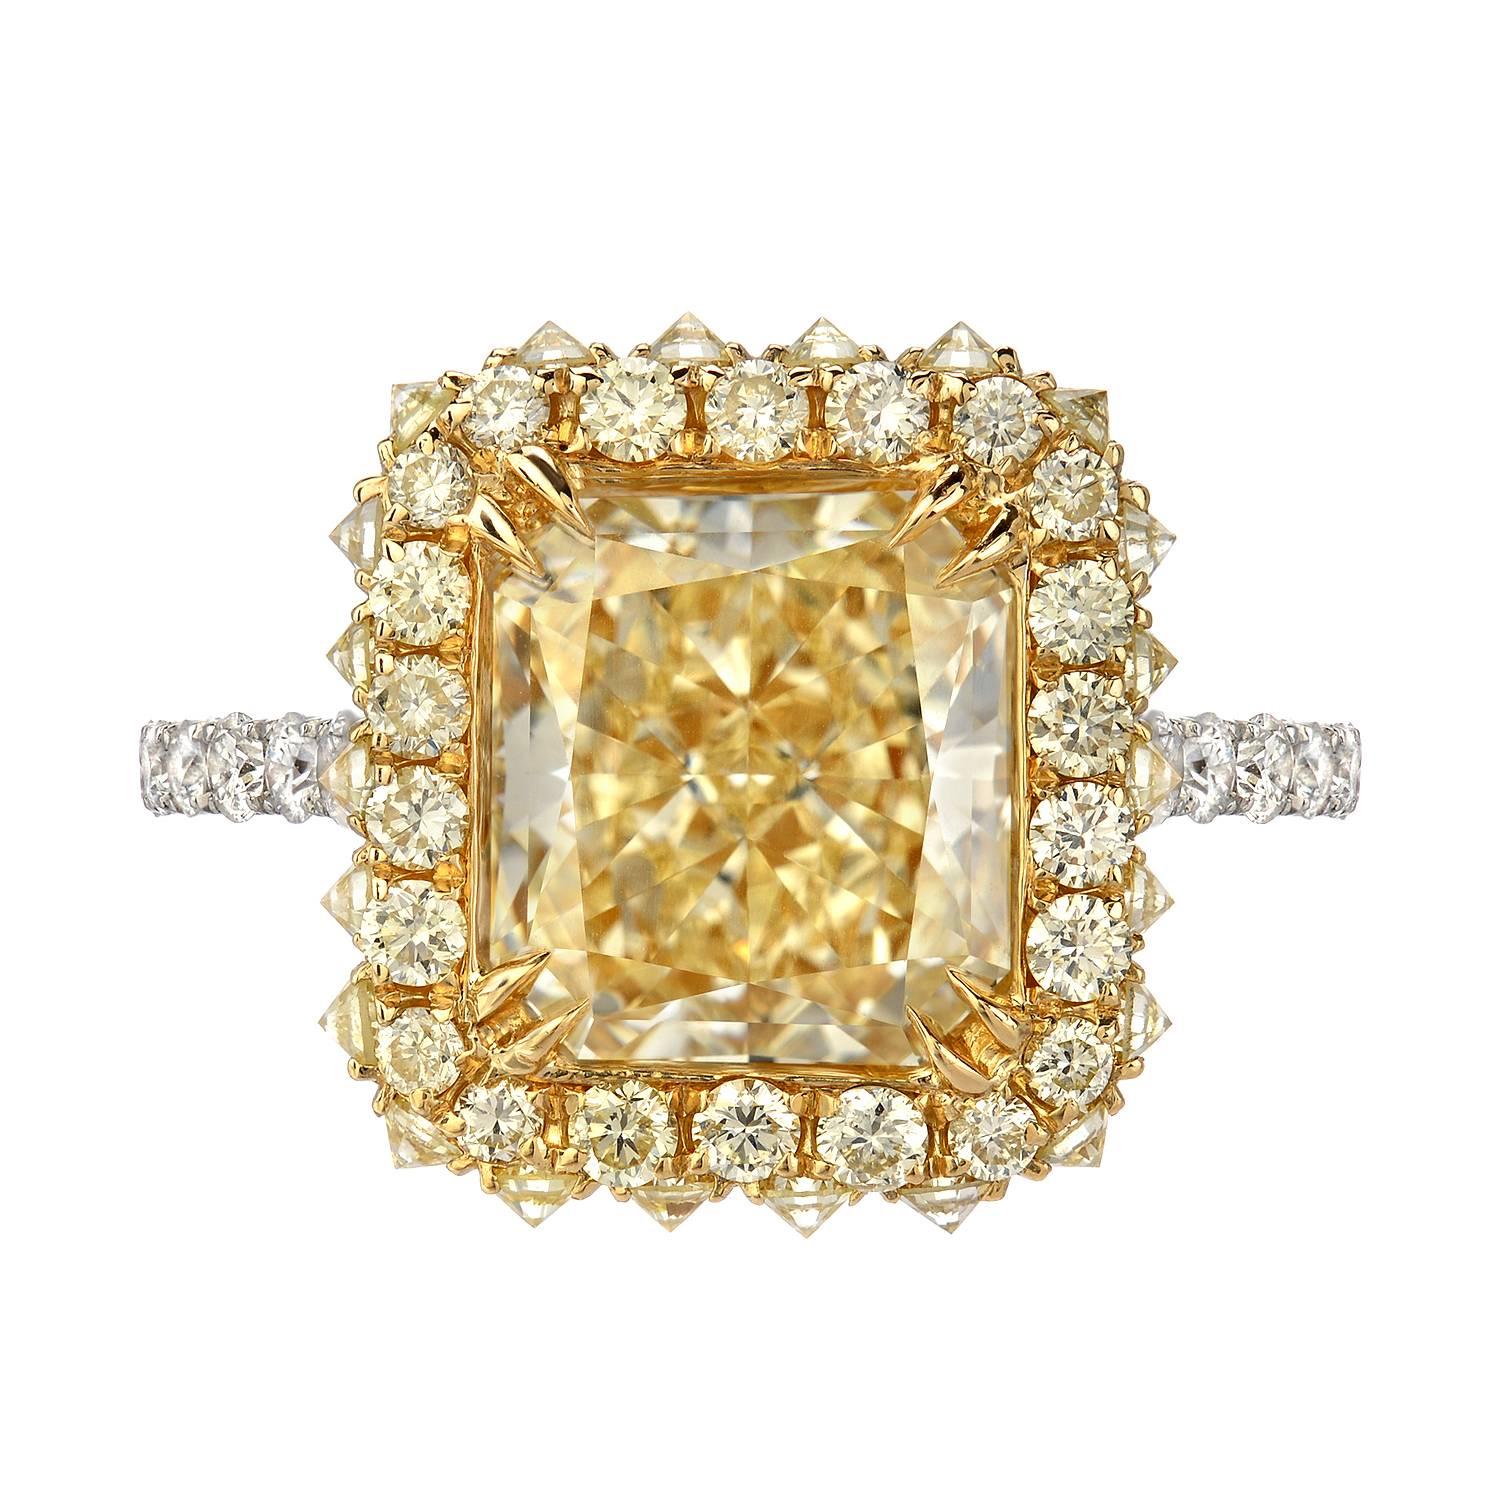 Contemporary Fancy Light Yellow Diamond Ring 3.78 Carat Radiant Cut GIA Certified For Sale